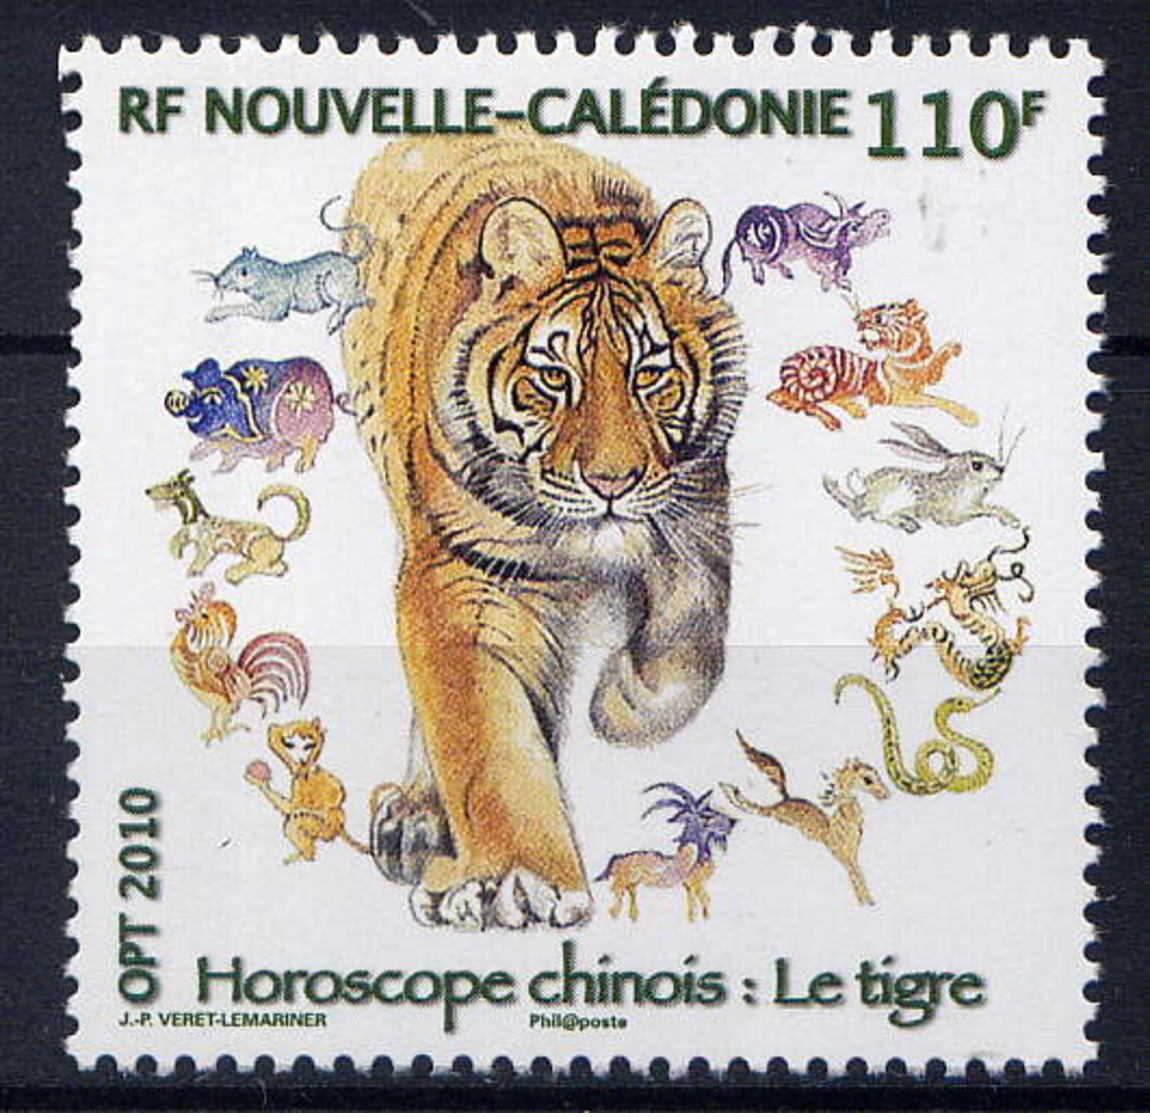 NCE - 1093** - ANNEE LUNAIRE CHINOISE DU TIGRE - Neufs